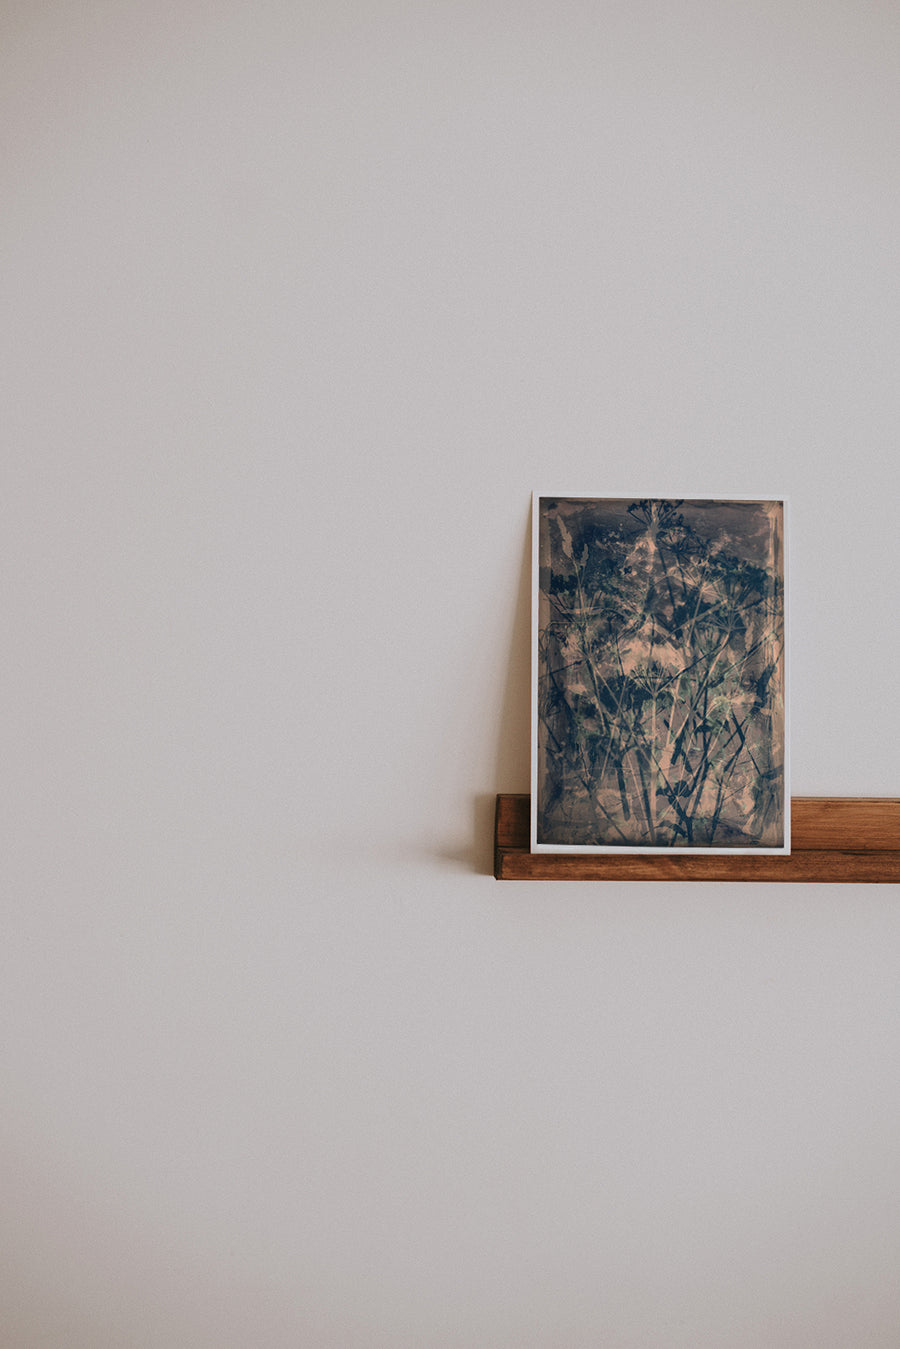 Plain wall with wooden shelf off to the side of the image with a framed artwork on. Artwork shows a dark blue/black and pale amber cyanotype print of flowers.